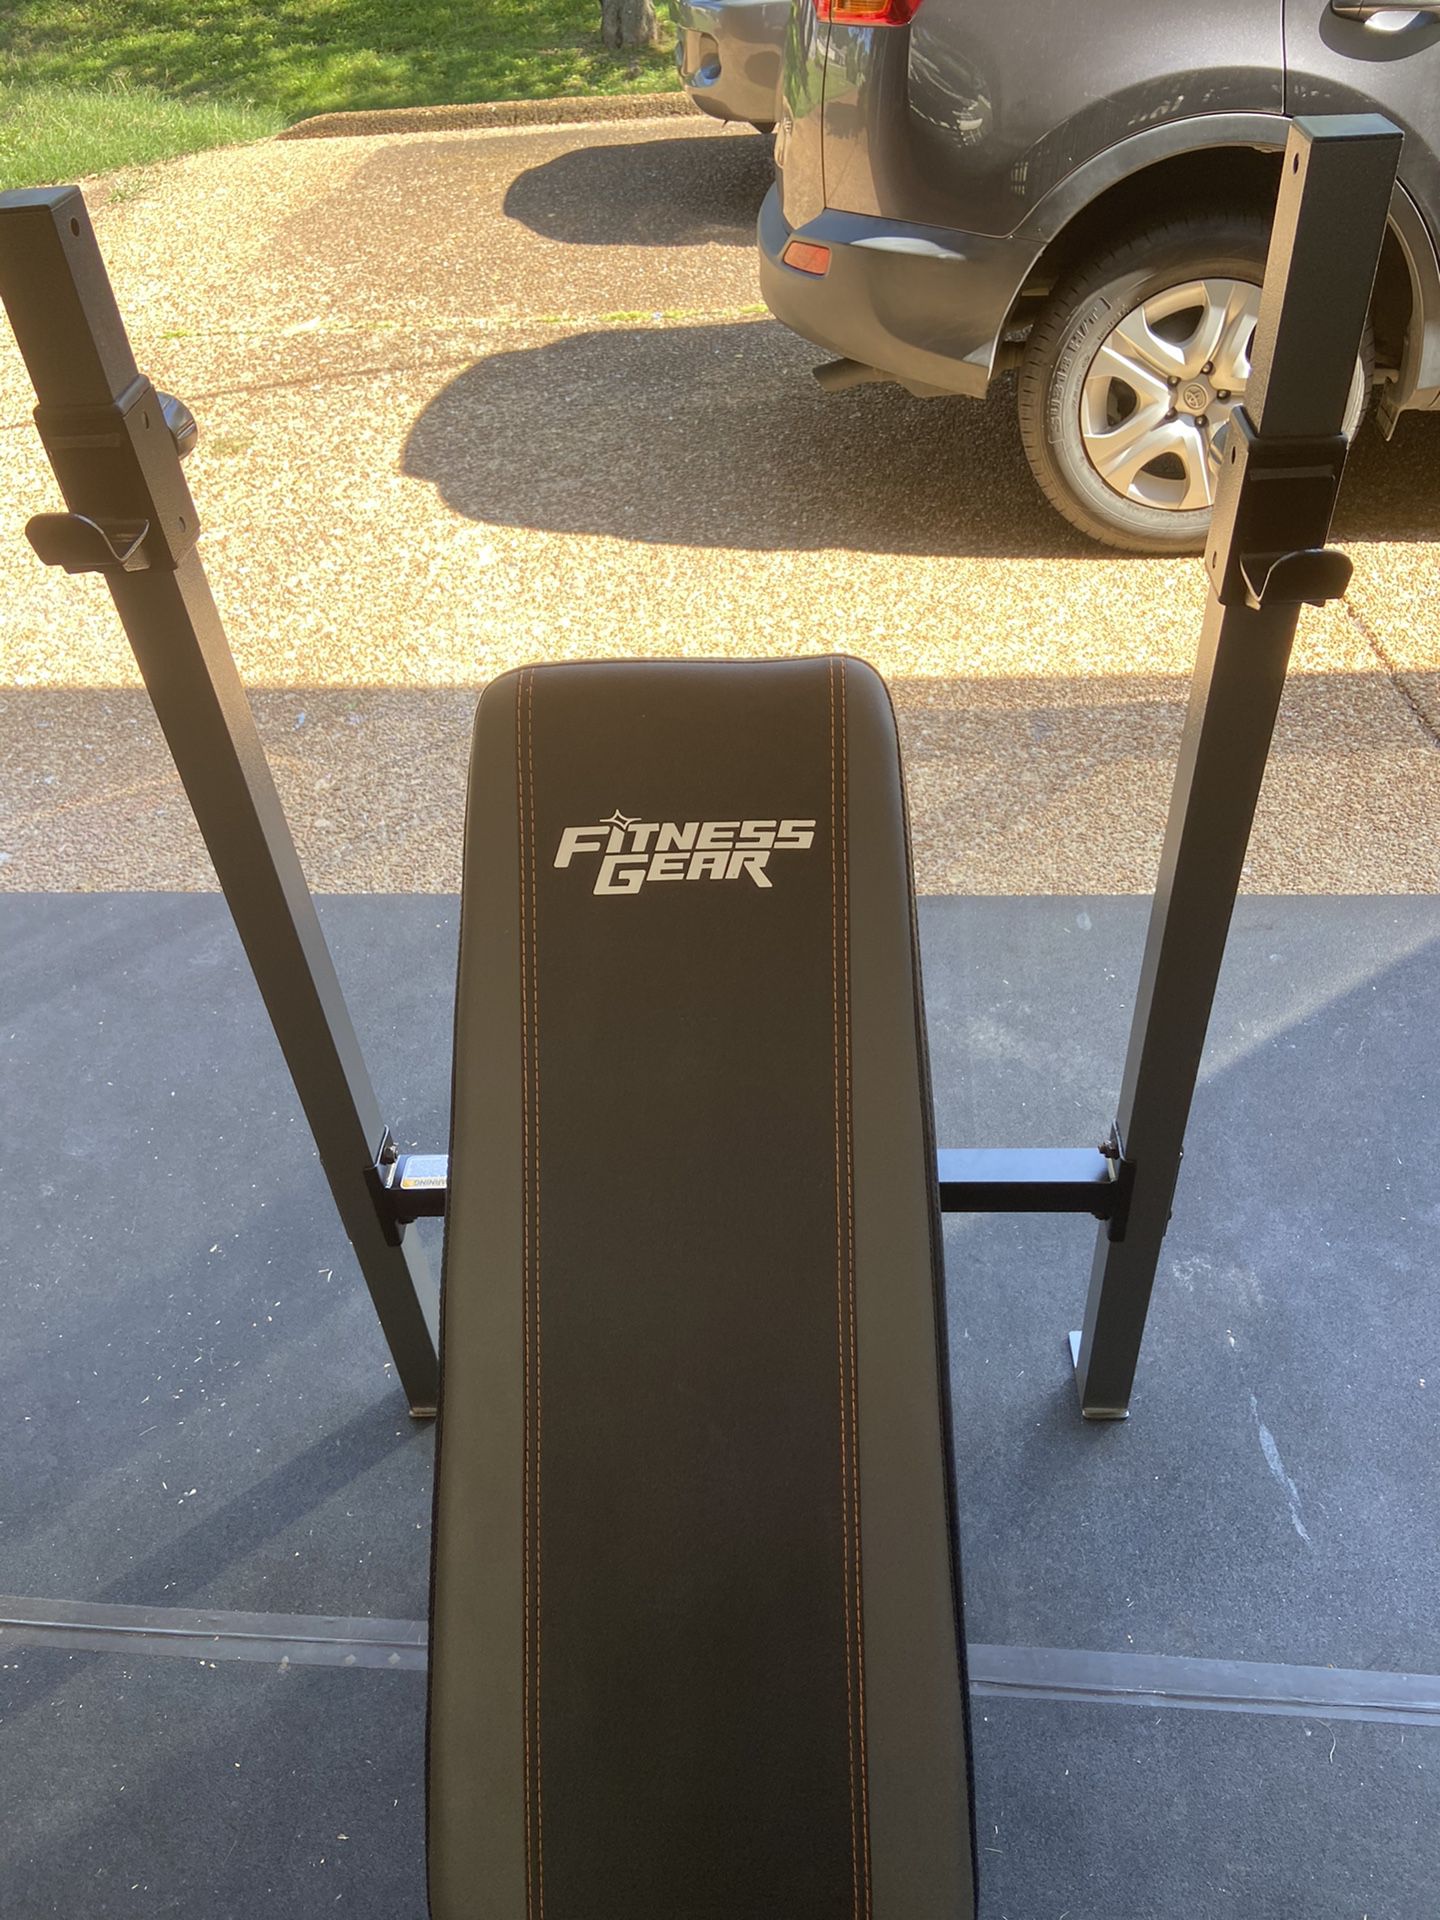 Brand new Fitness Gear weight bench, fully assembled